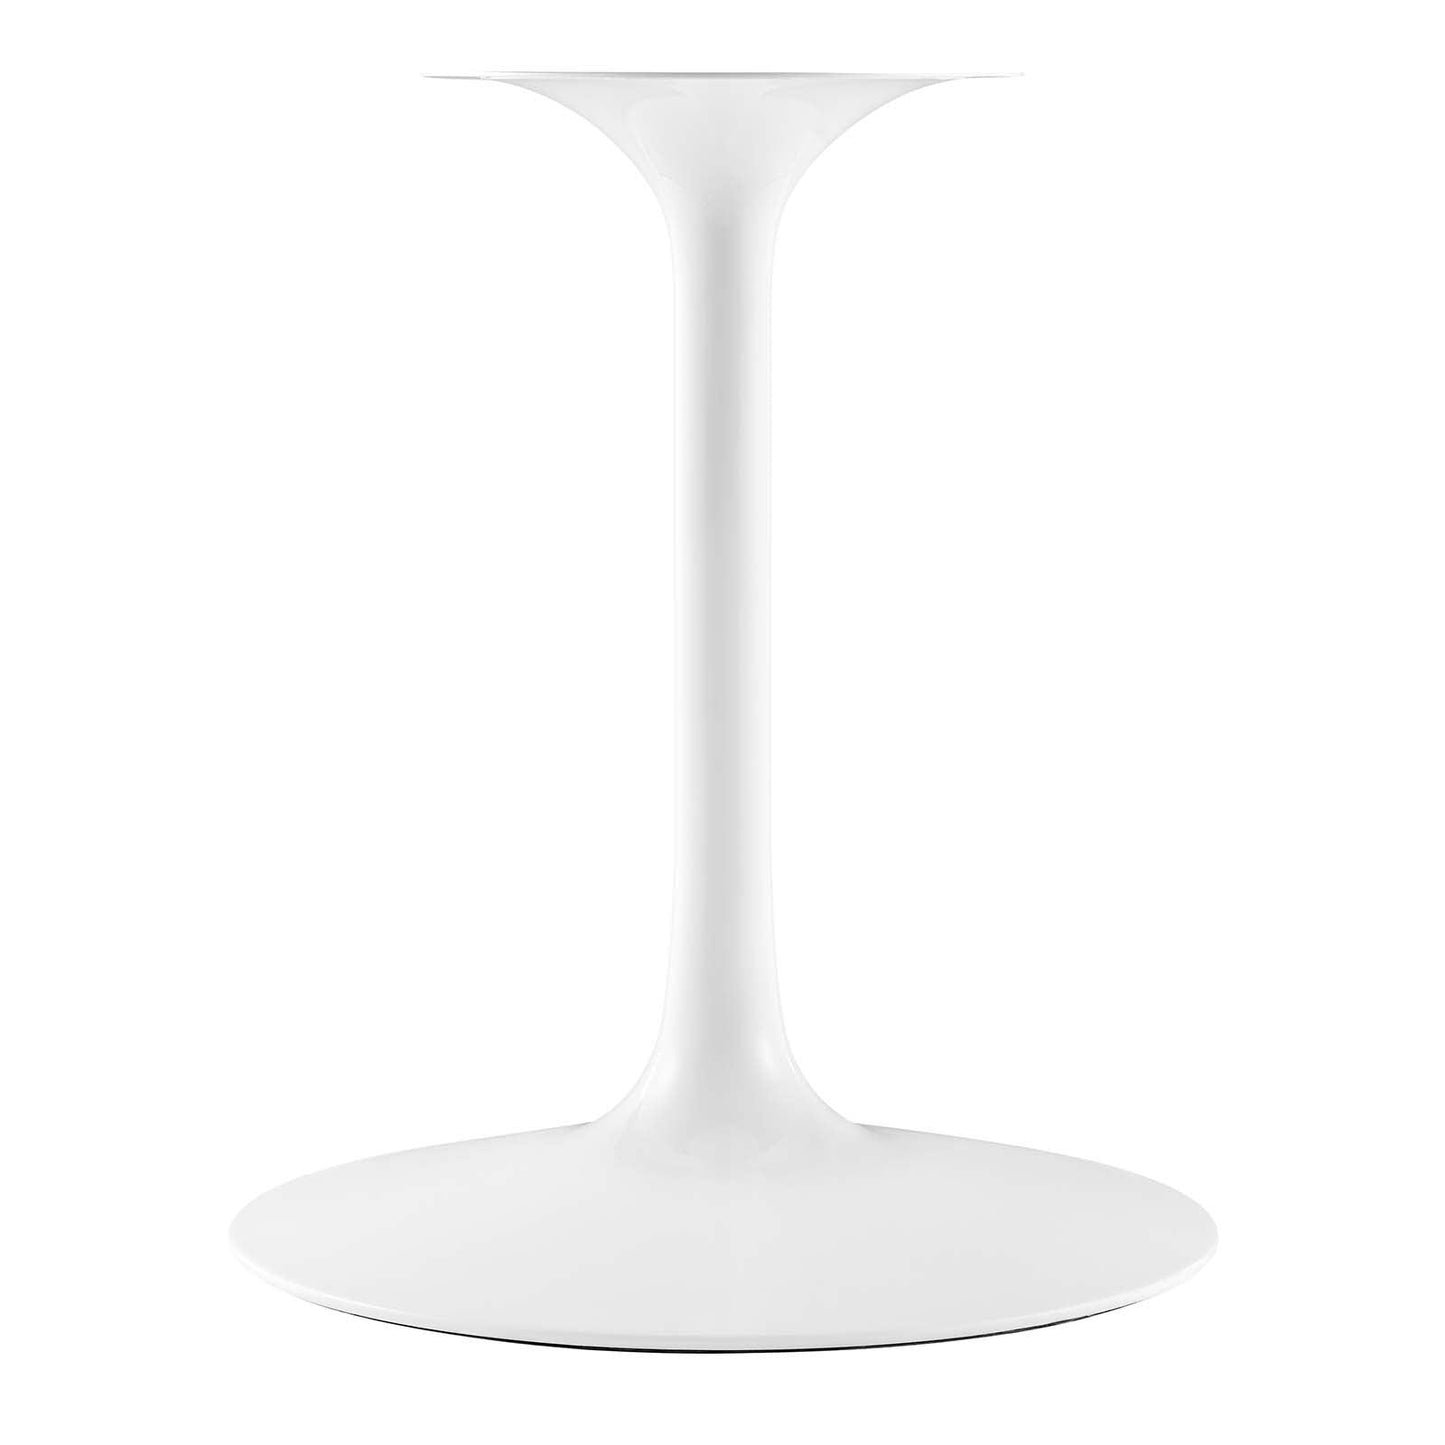 Modway Lippa 60" Oval Artificial Marble Dining Table White FredCo